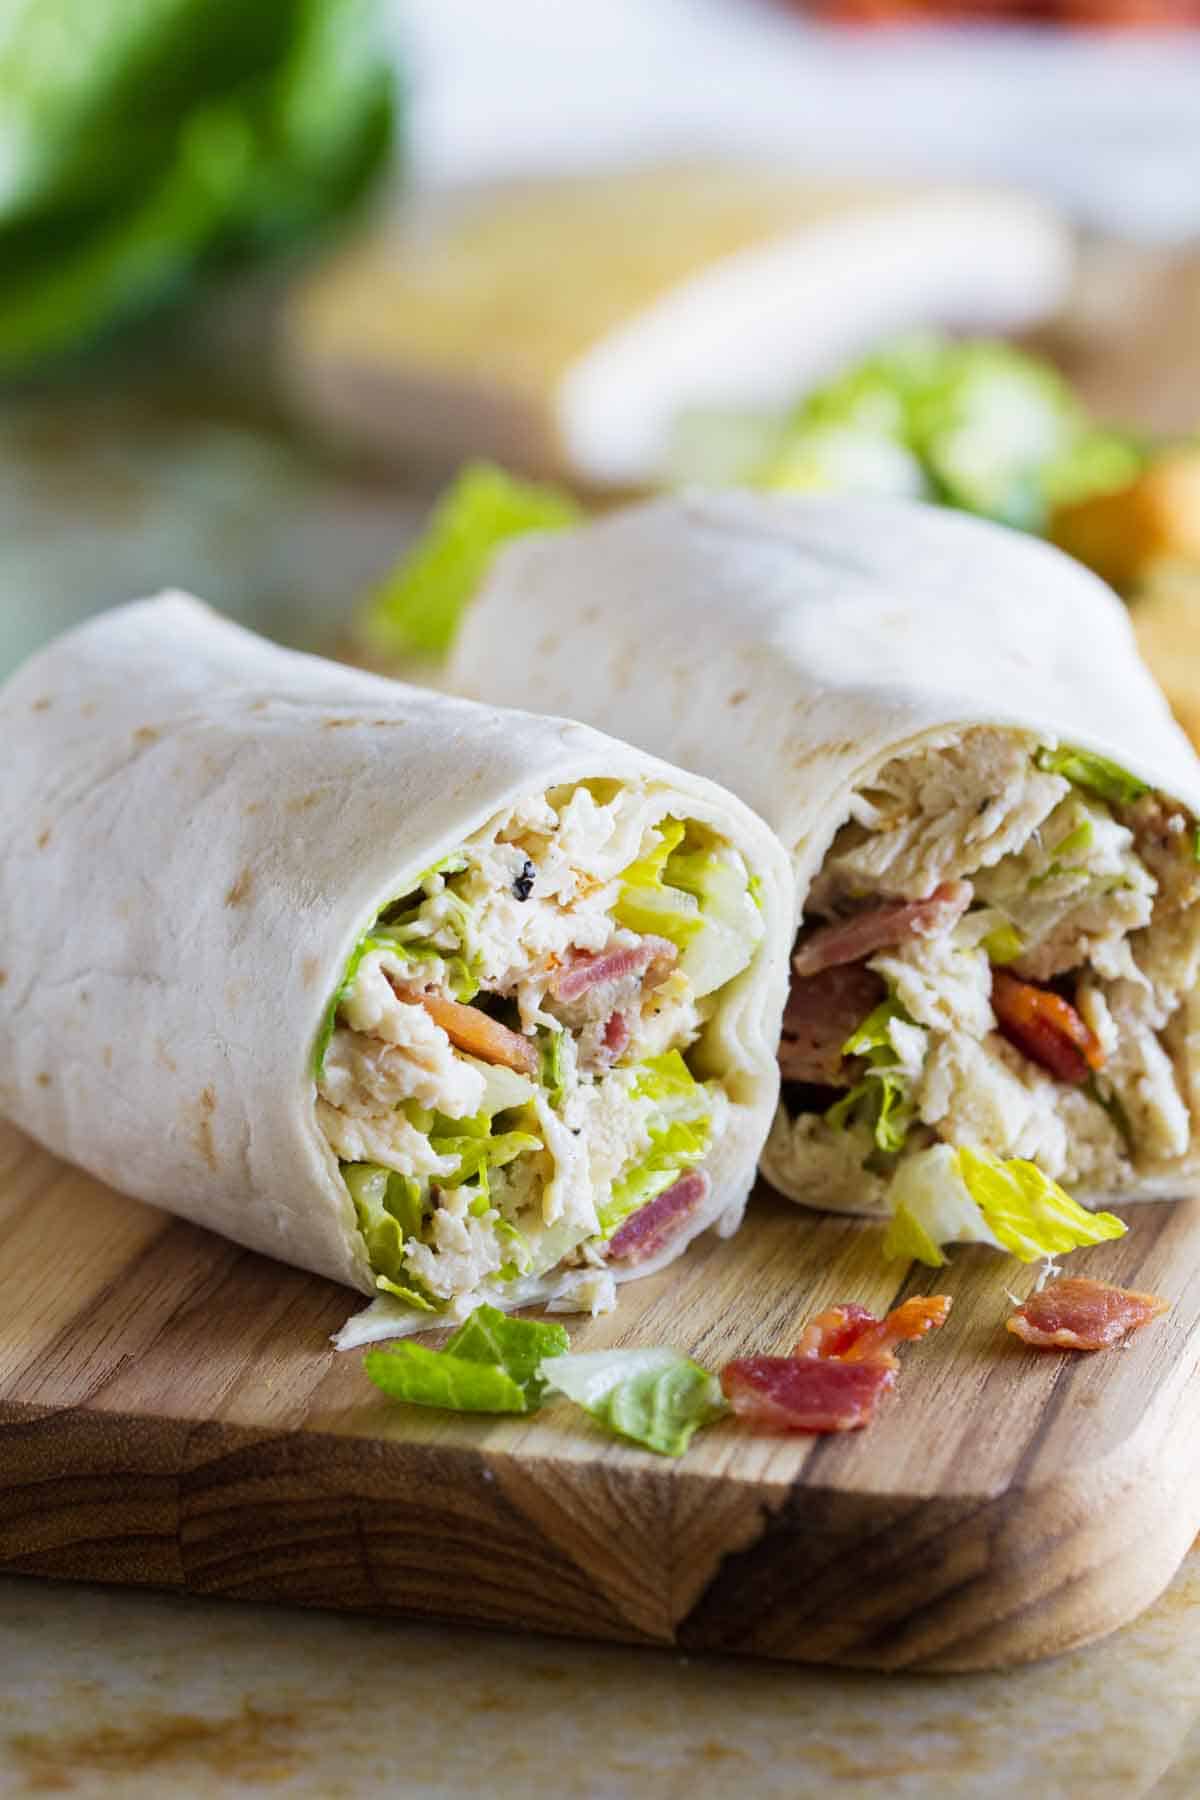 Chicken Caesar Wrap cut in half to show filling.